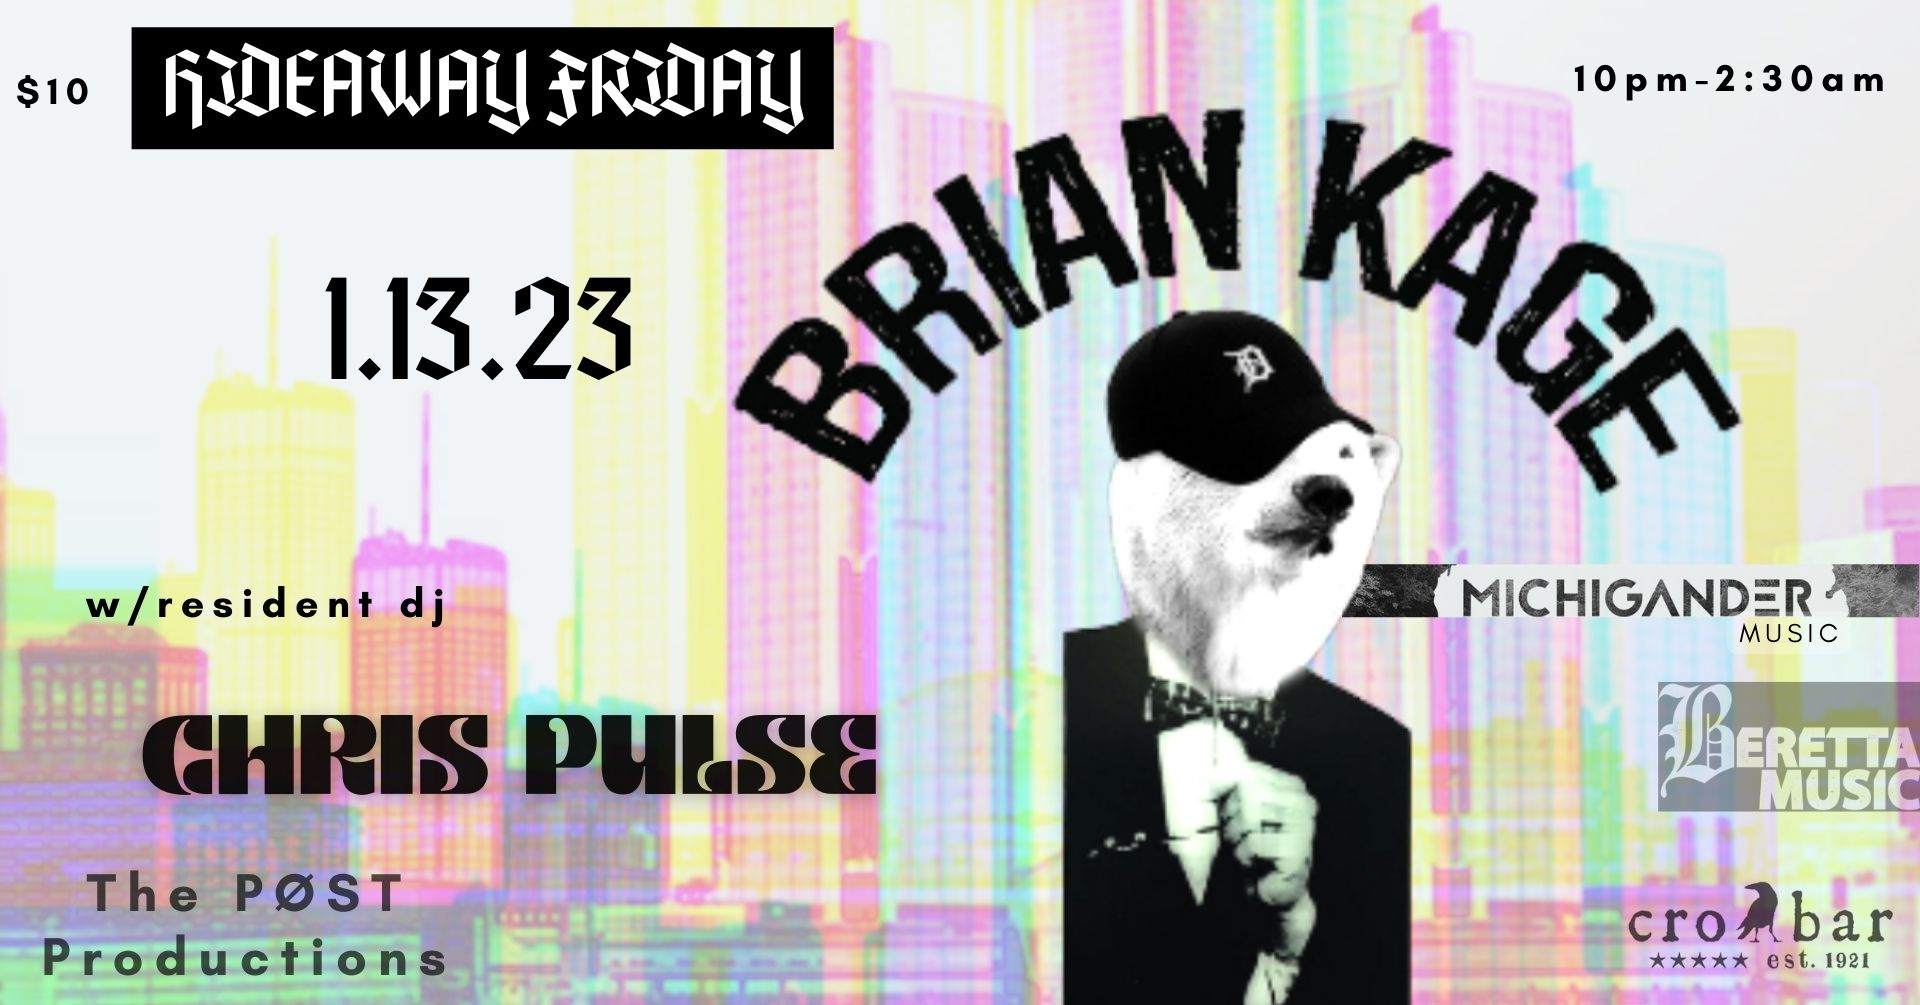 Hideaway Fridays: feat. Brian Kage & resident dj Chris Pulse - フライヤー表